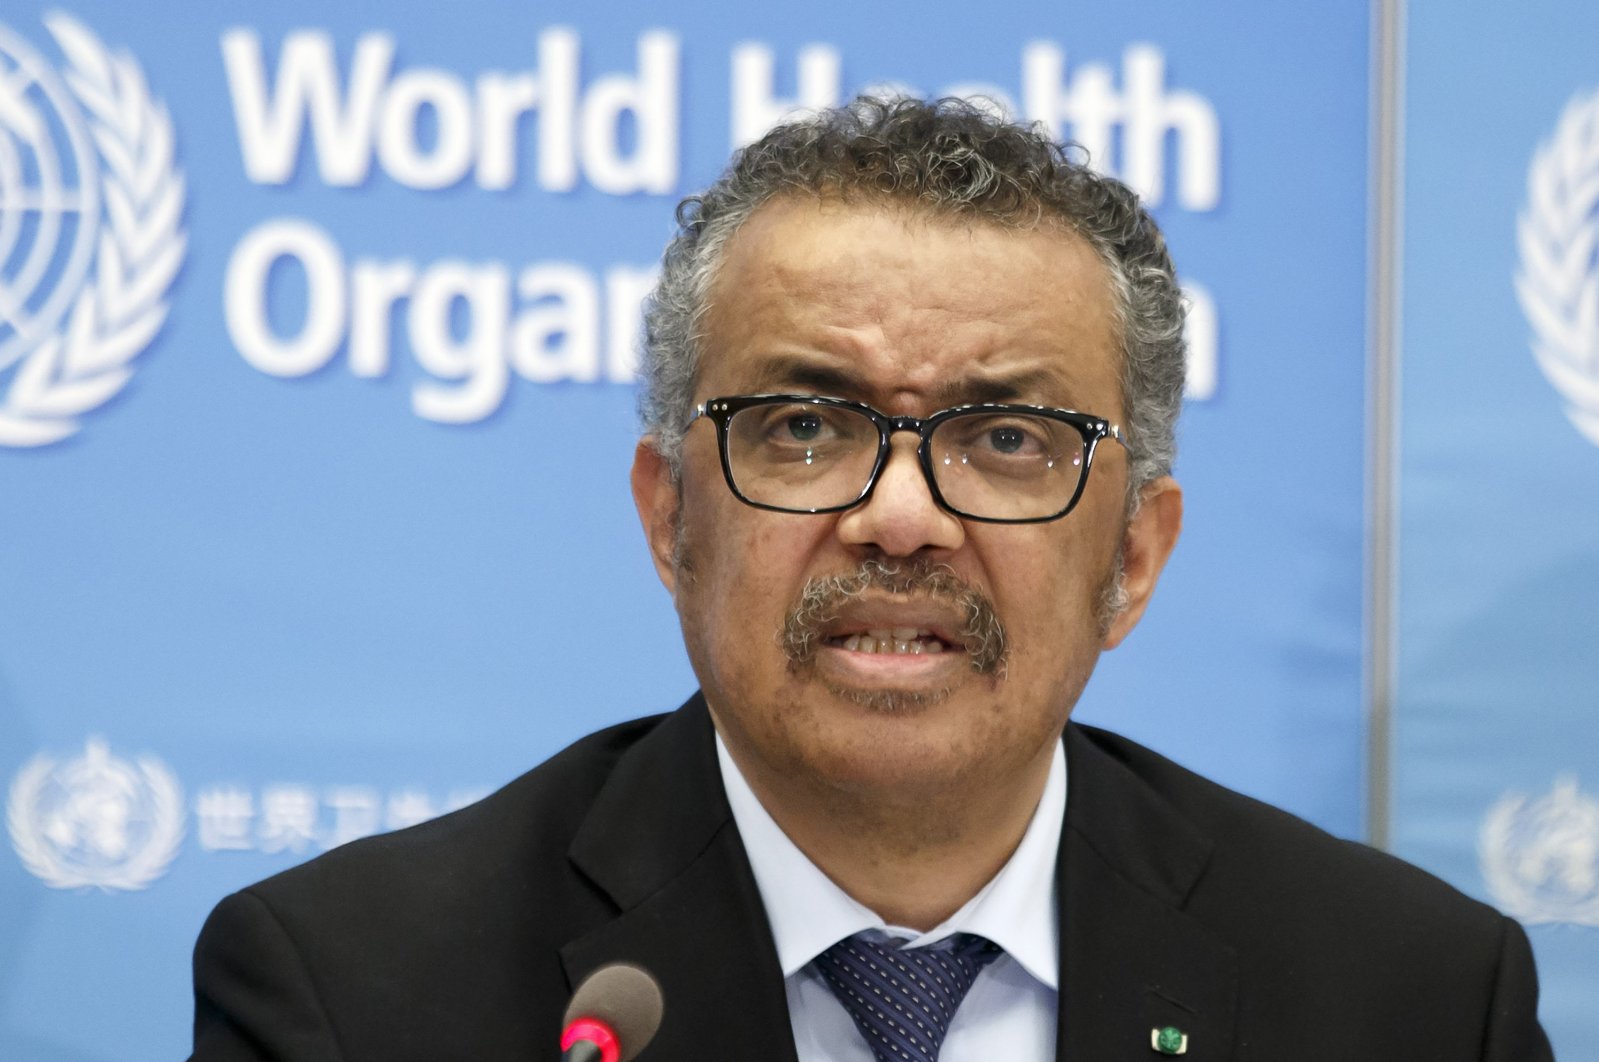 Tedros Adhanom Ghebreyesus, Director-General of the World Health Organization, addresses a press conference about the update on COVID-19 at the WHO headquarters in Geneva, Switzerland, Feb. 24, 2020. (AP Photo)